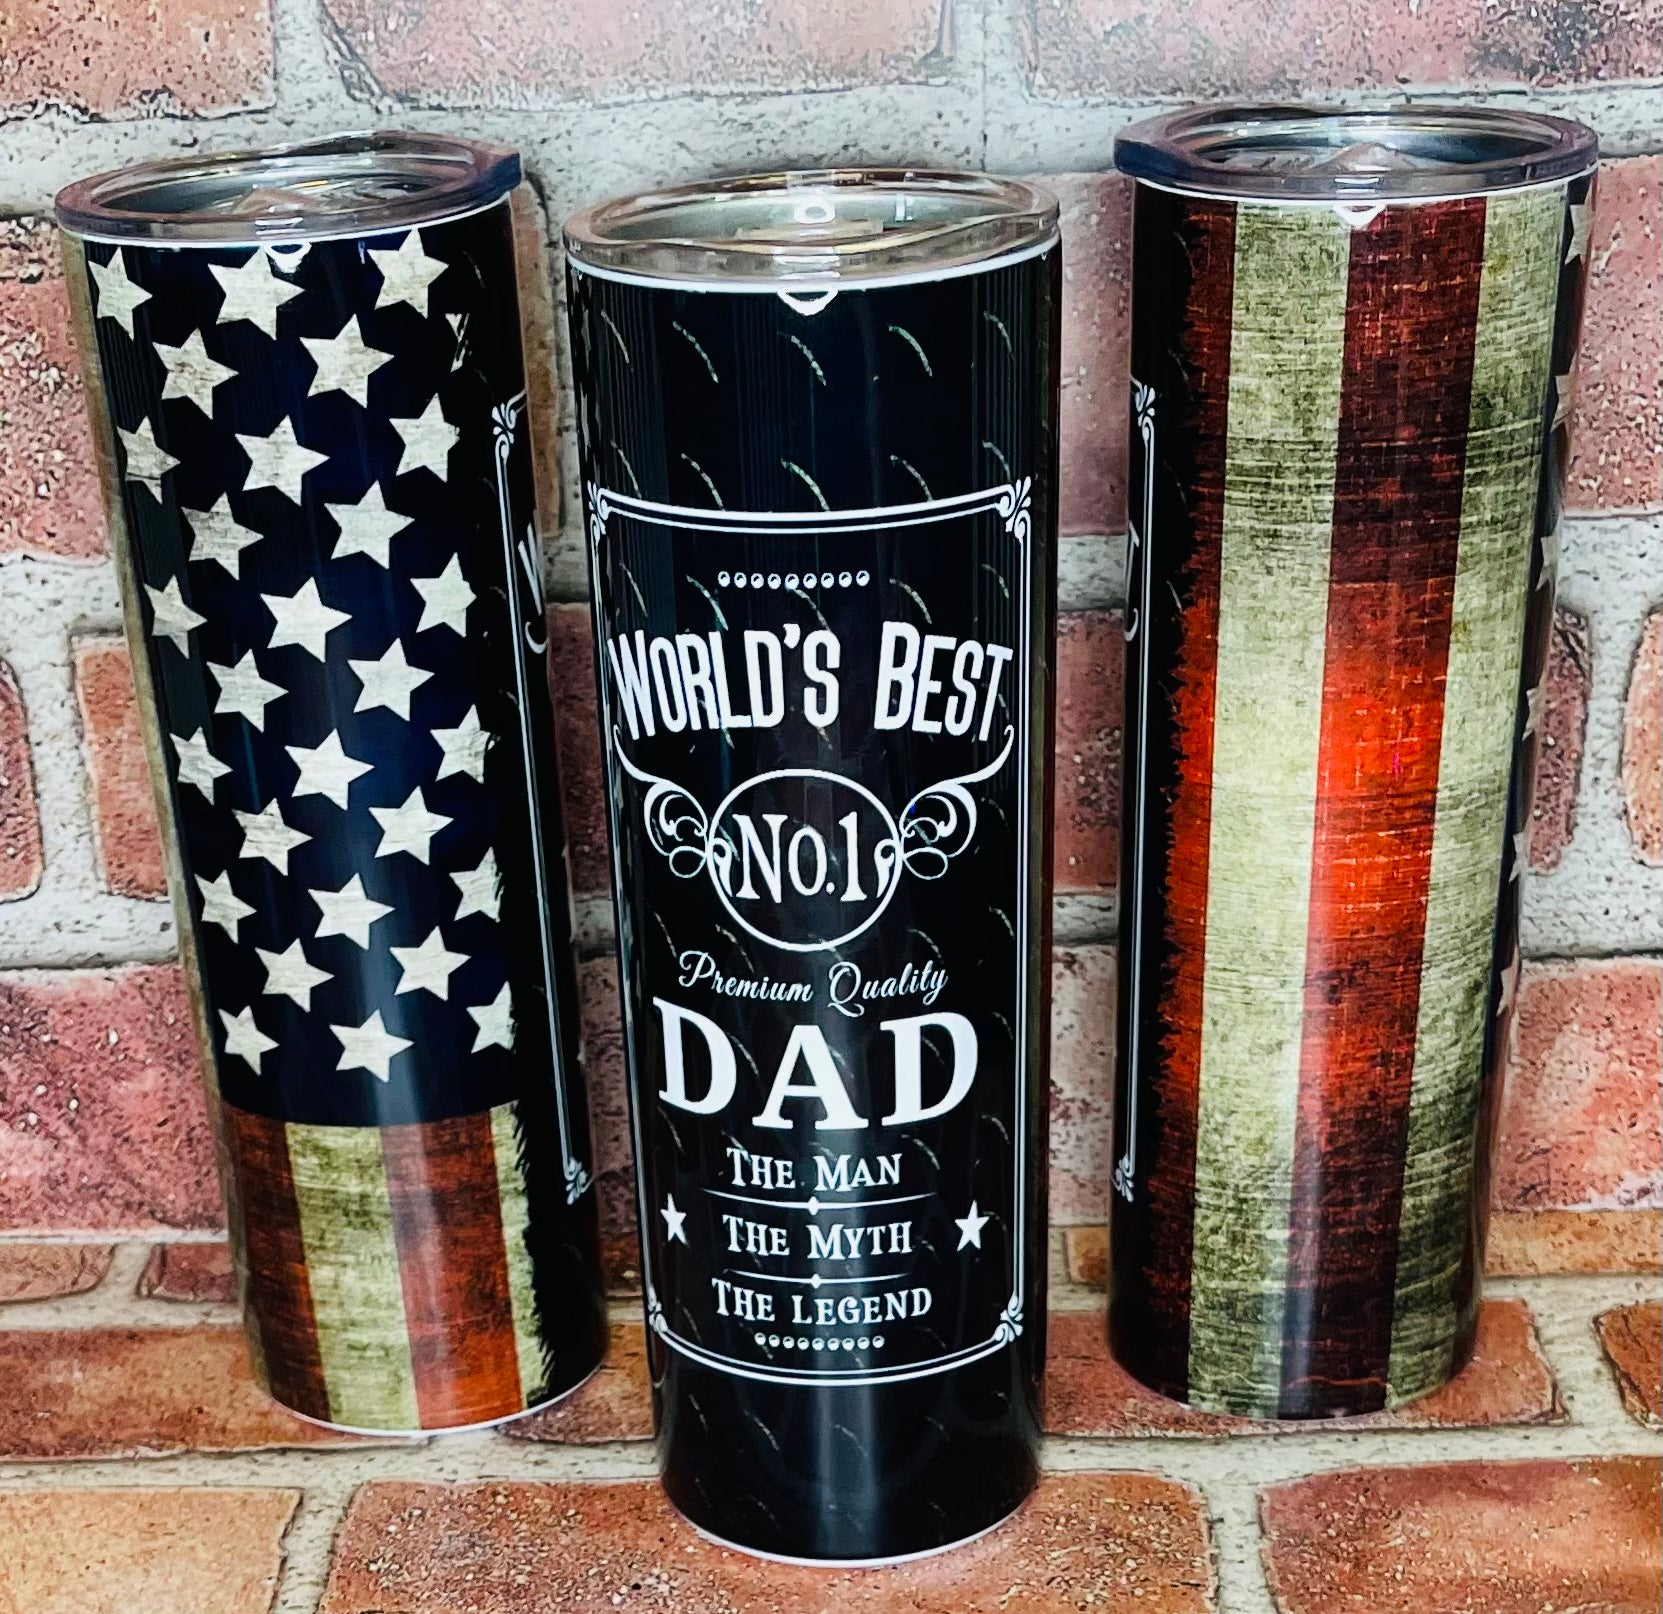 Best Dad Ever Stainless-steel Travel Mug / Personalized Insulated